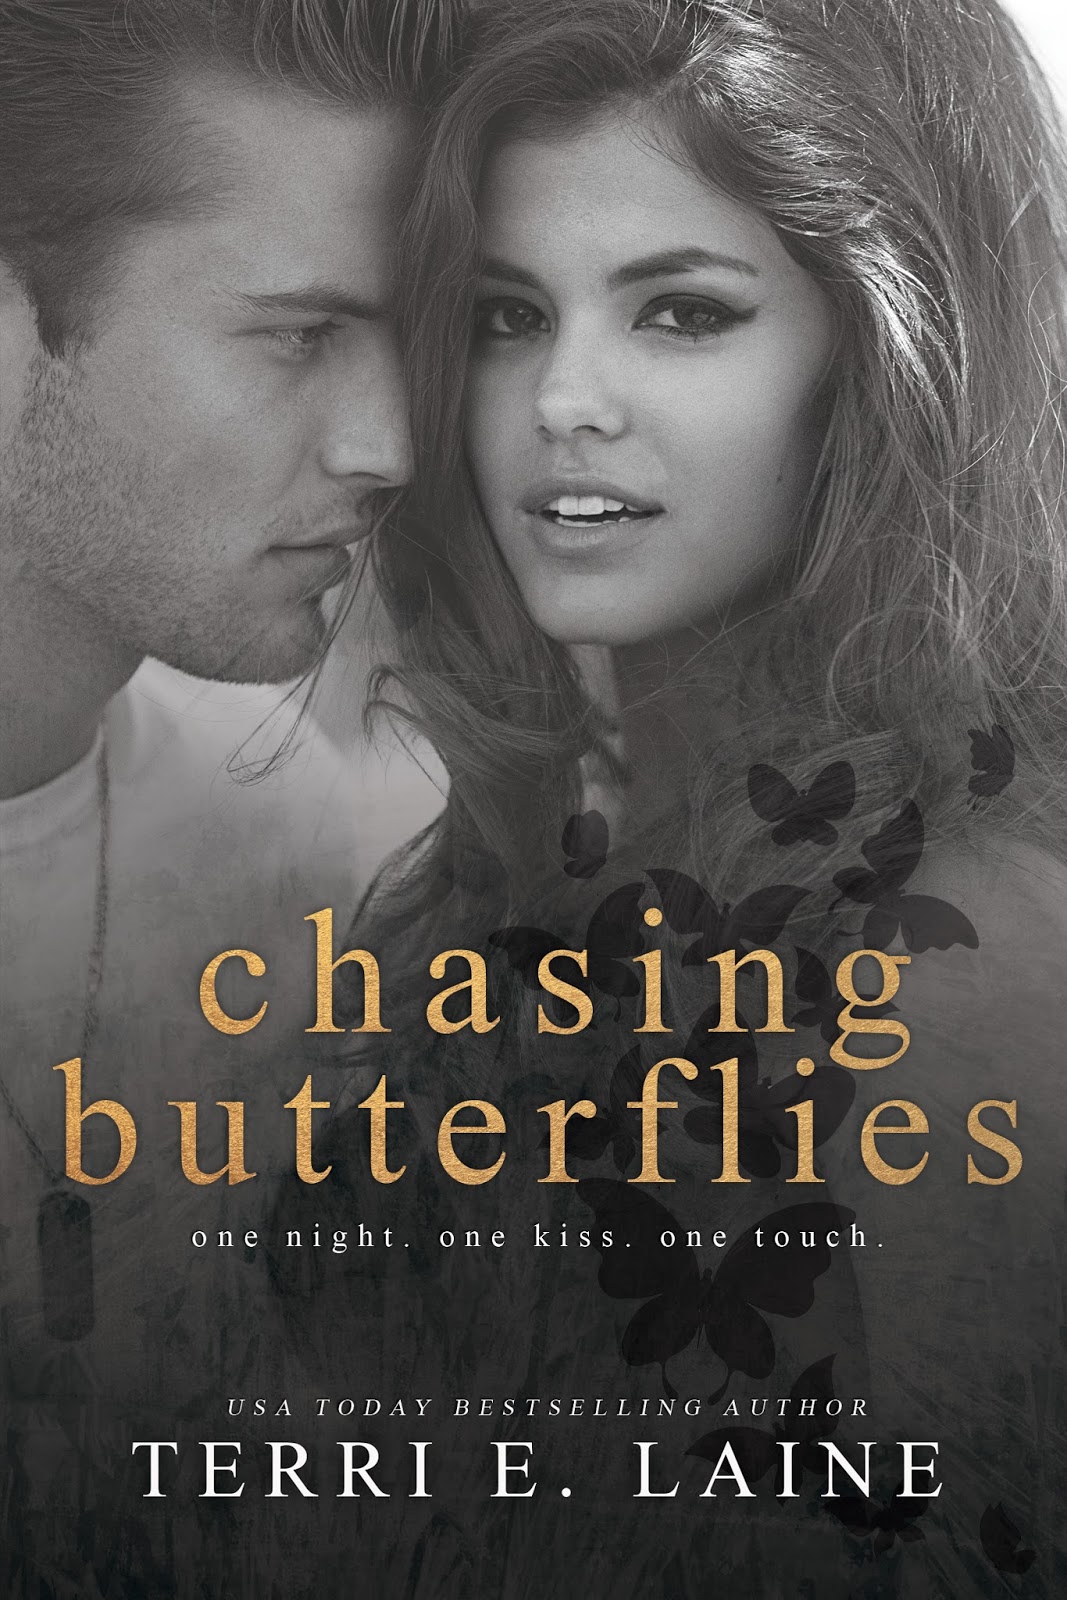 Liv's World of Books: Cover Reveal: Chasing Butterflies by Terri E. Laine